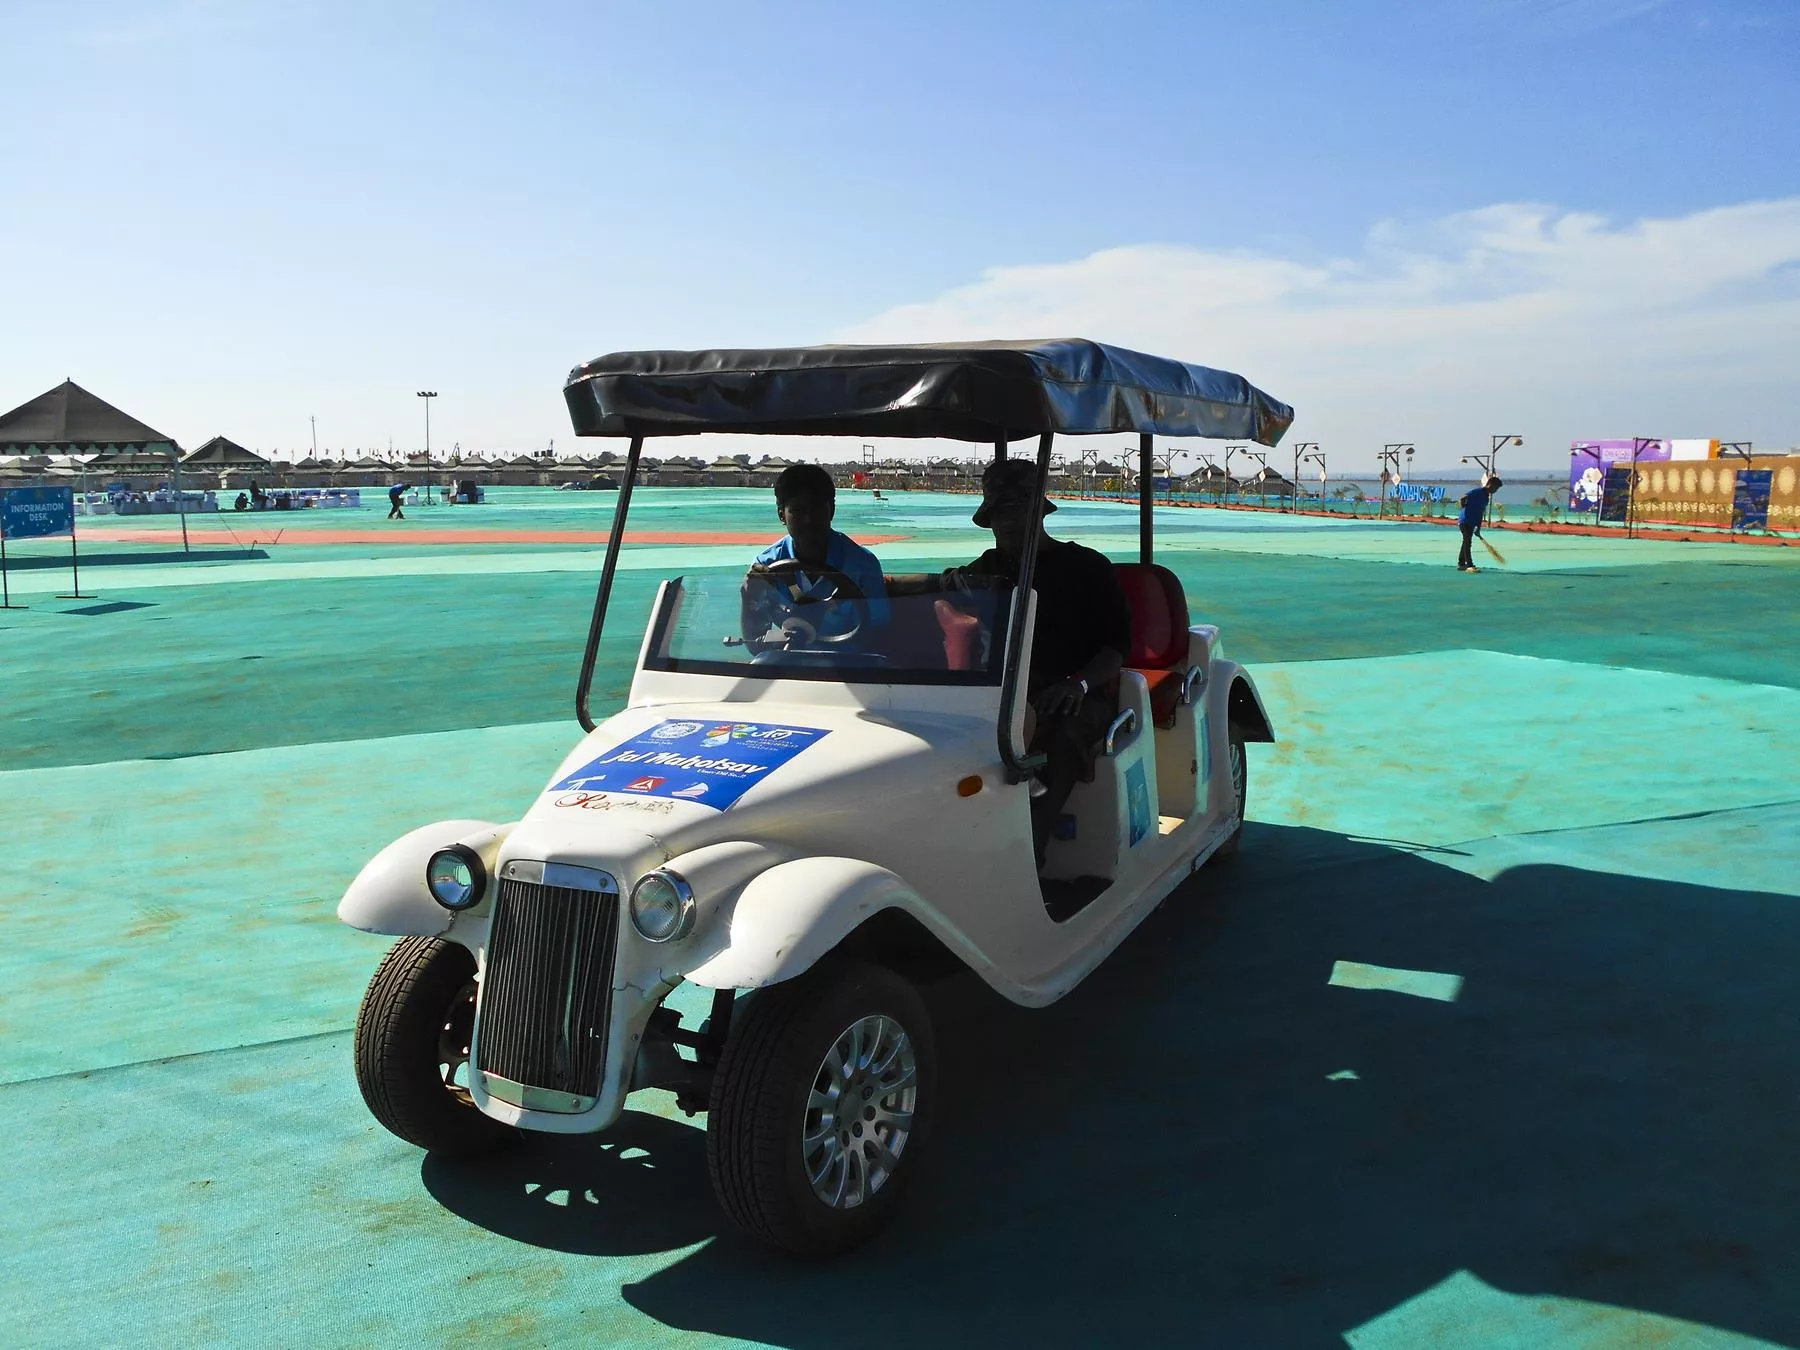 JalMahotsav in 2016-17 - Golf Cart - Image of Golf tourism, A panoramic view of a golf course with r